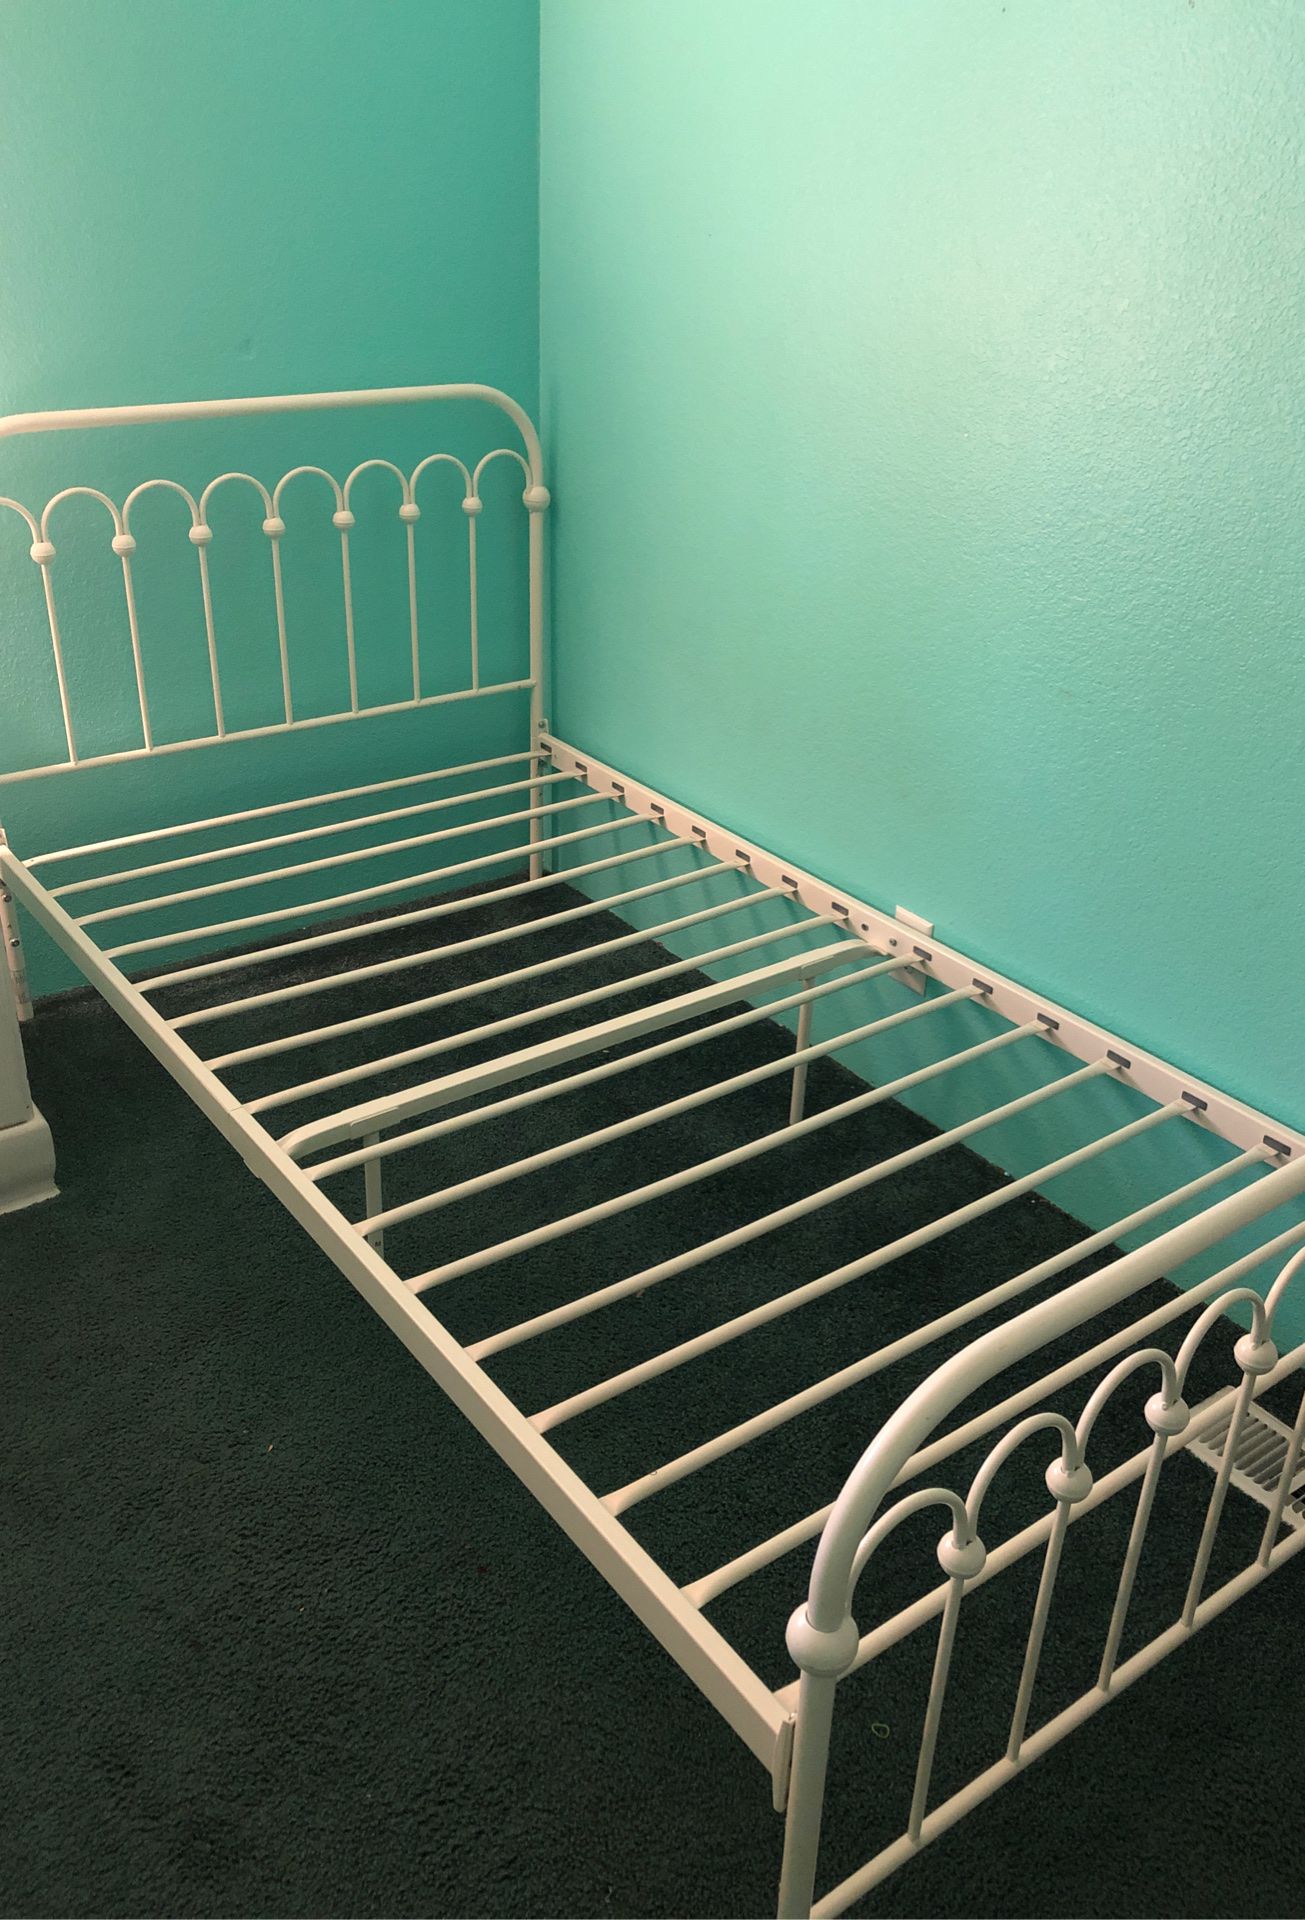 2 Matching white metal twin bed frames.